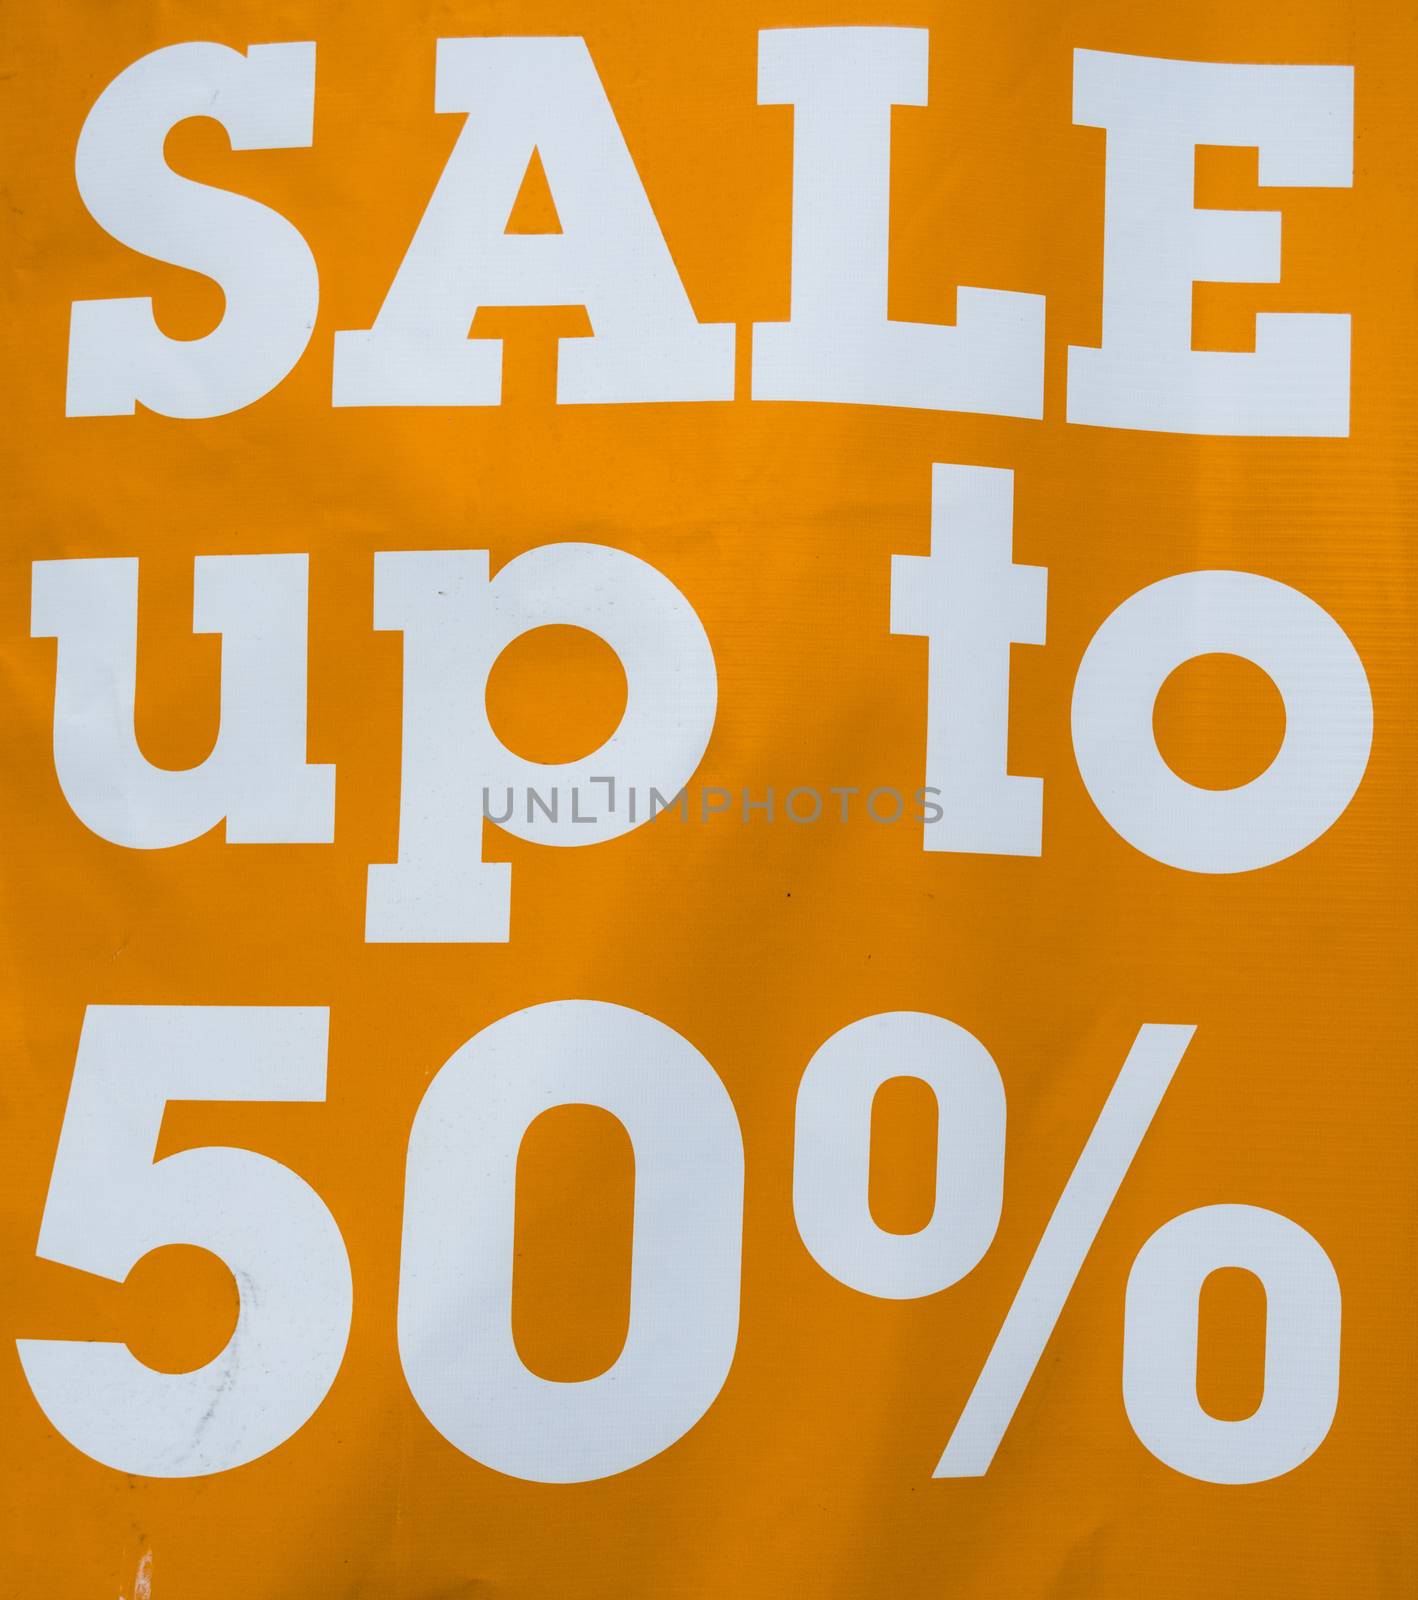 Sale up to 50 Percents Discount Promotion sign